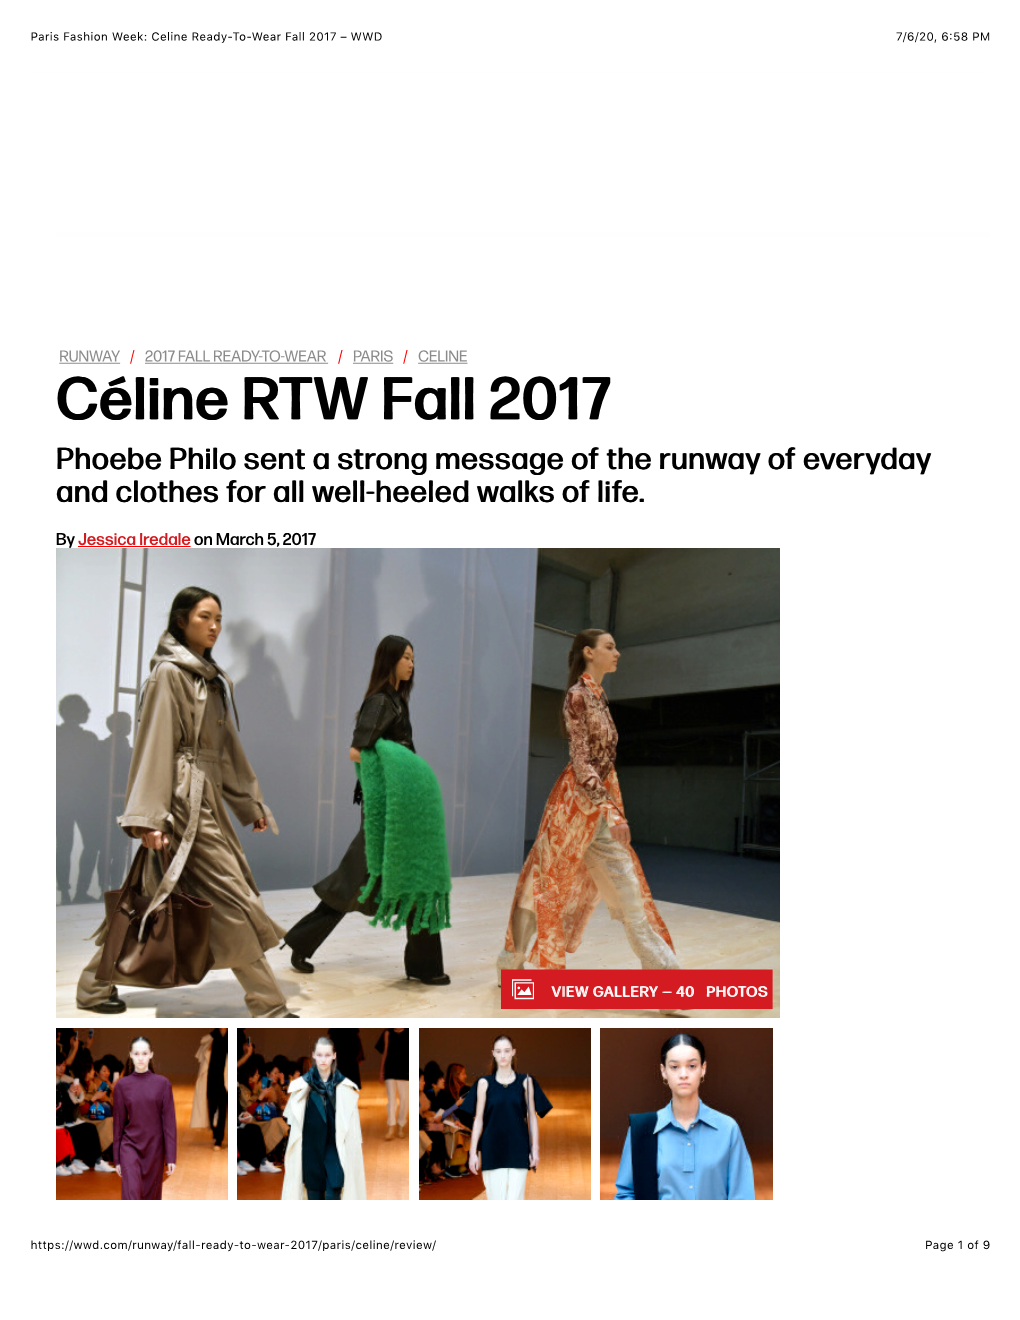 Céline RTW Fall 2017 Phoebe Philo Sent a Strong Message of the Runway of Everyday and Clothes for All Well-Heeled Walks of Life